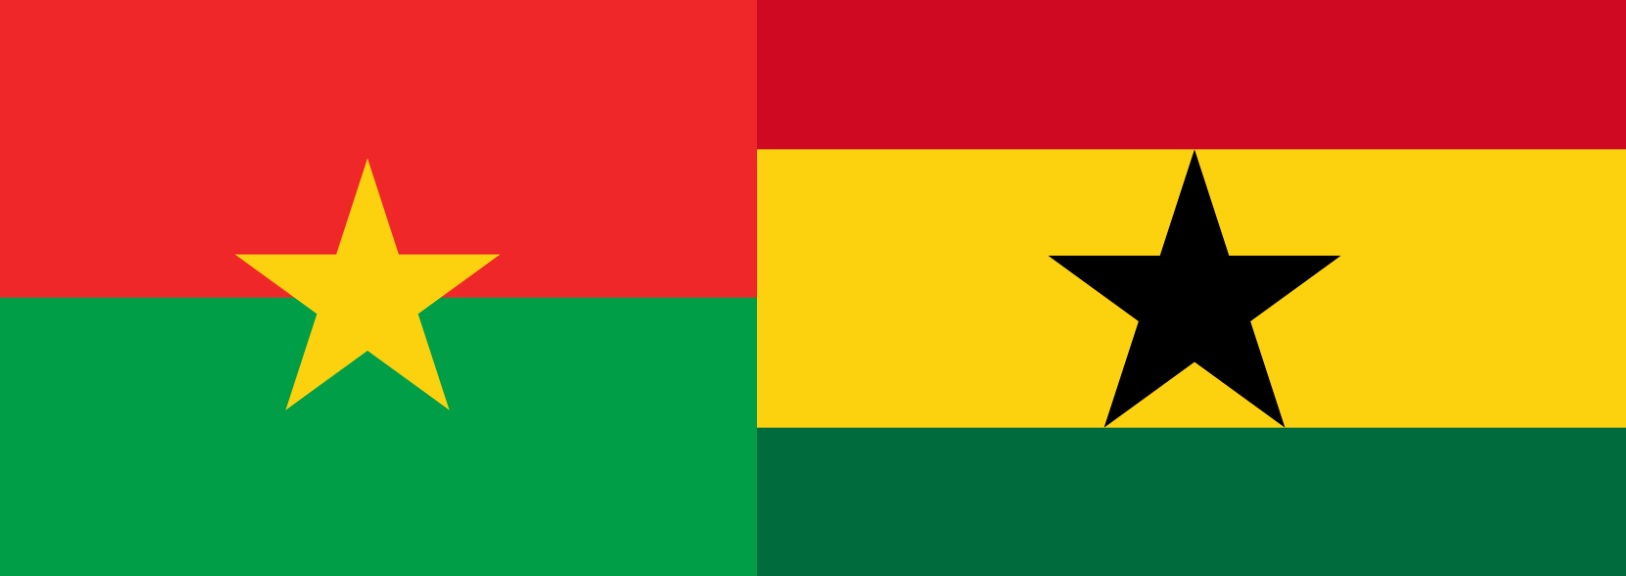 Ghana to strengthen relation with Burkina Faso with multiple projects